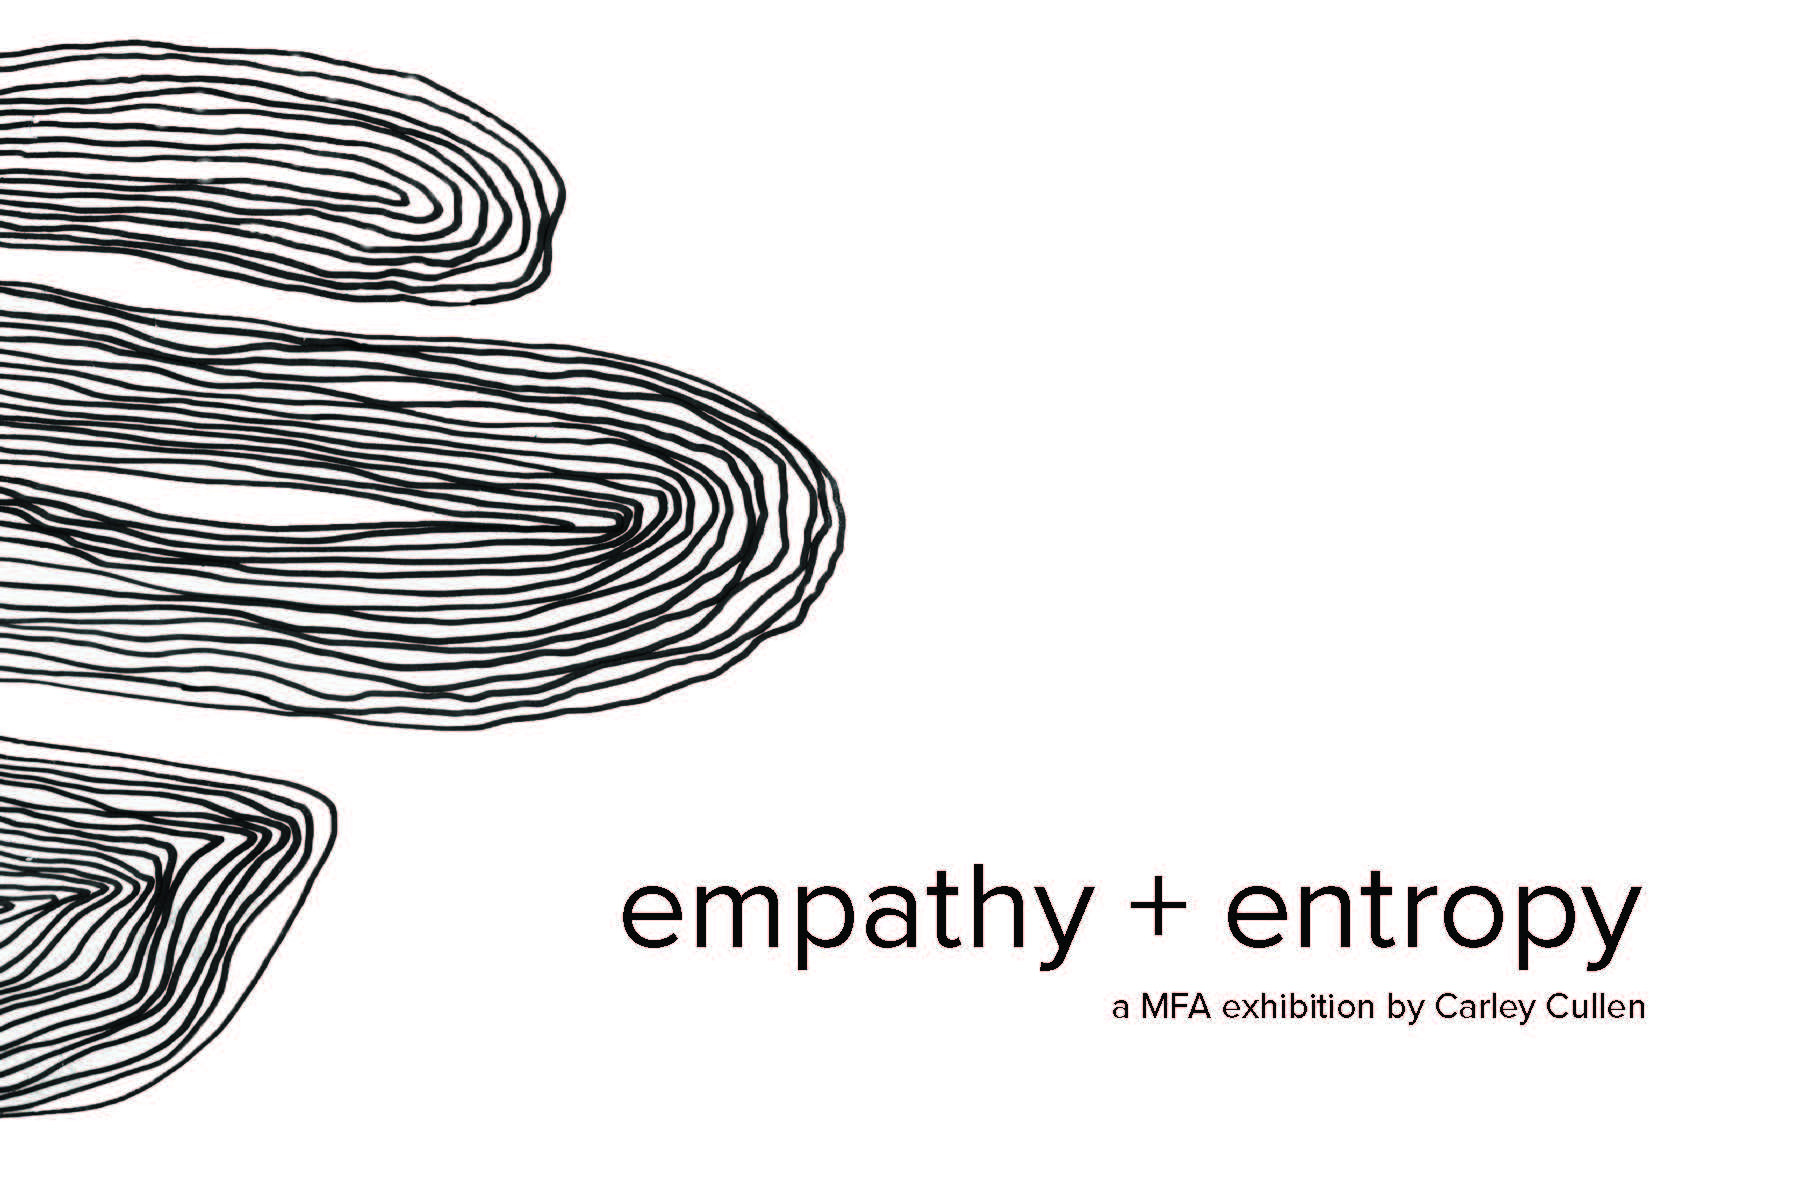 three sets of black looped lines empathy + entropy a MFA exhibition by Carley Cullen